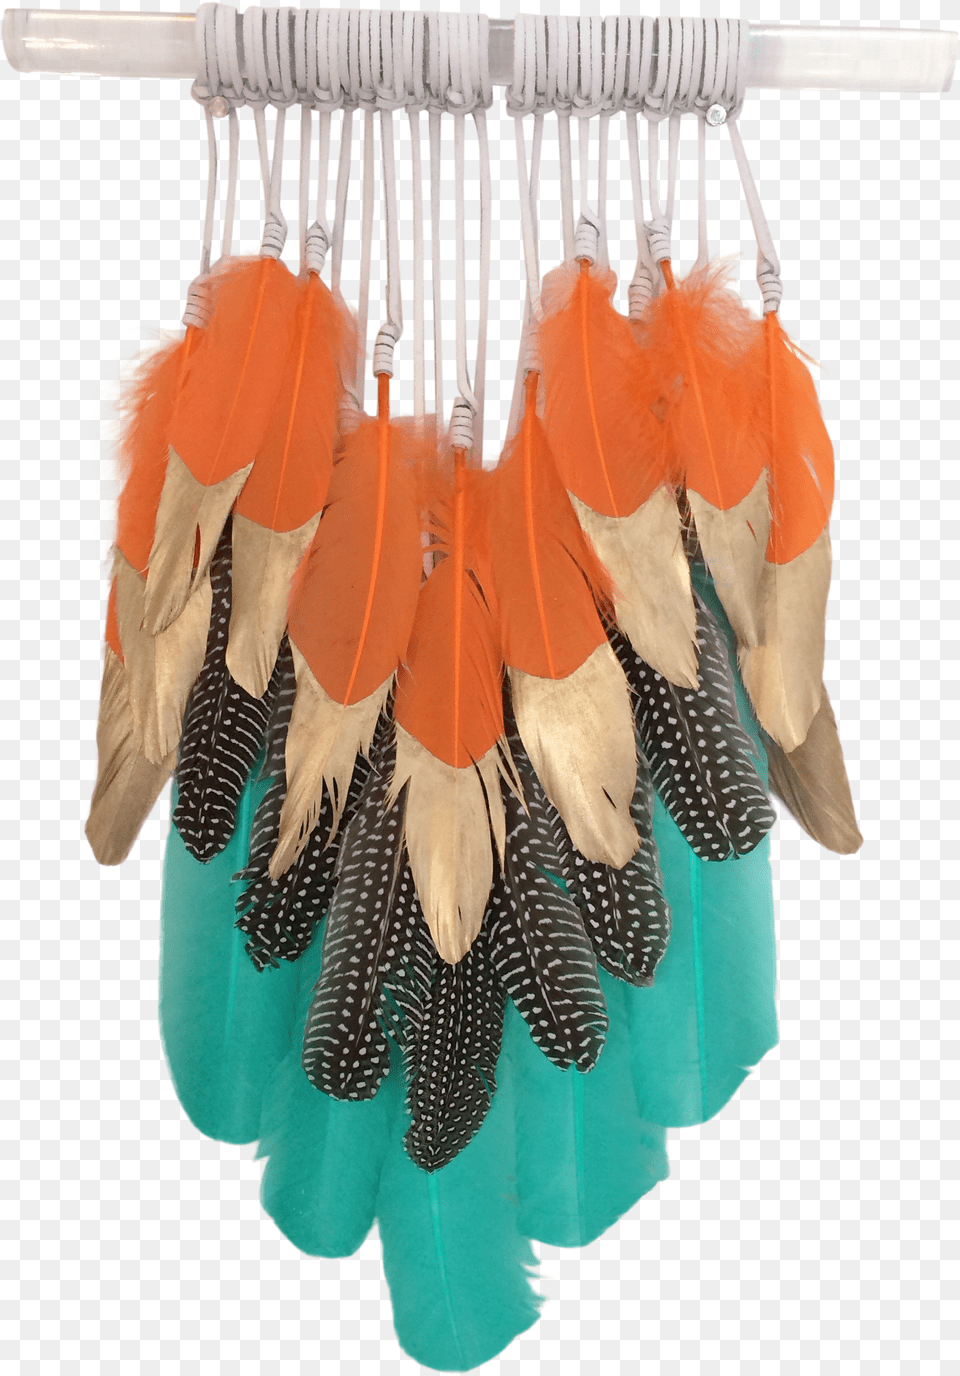 Gold Dipped Orange Amp Aqua With Speckled Feathers Earrings Free Png Download